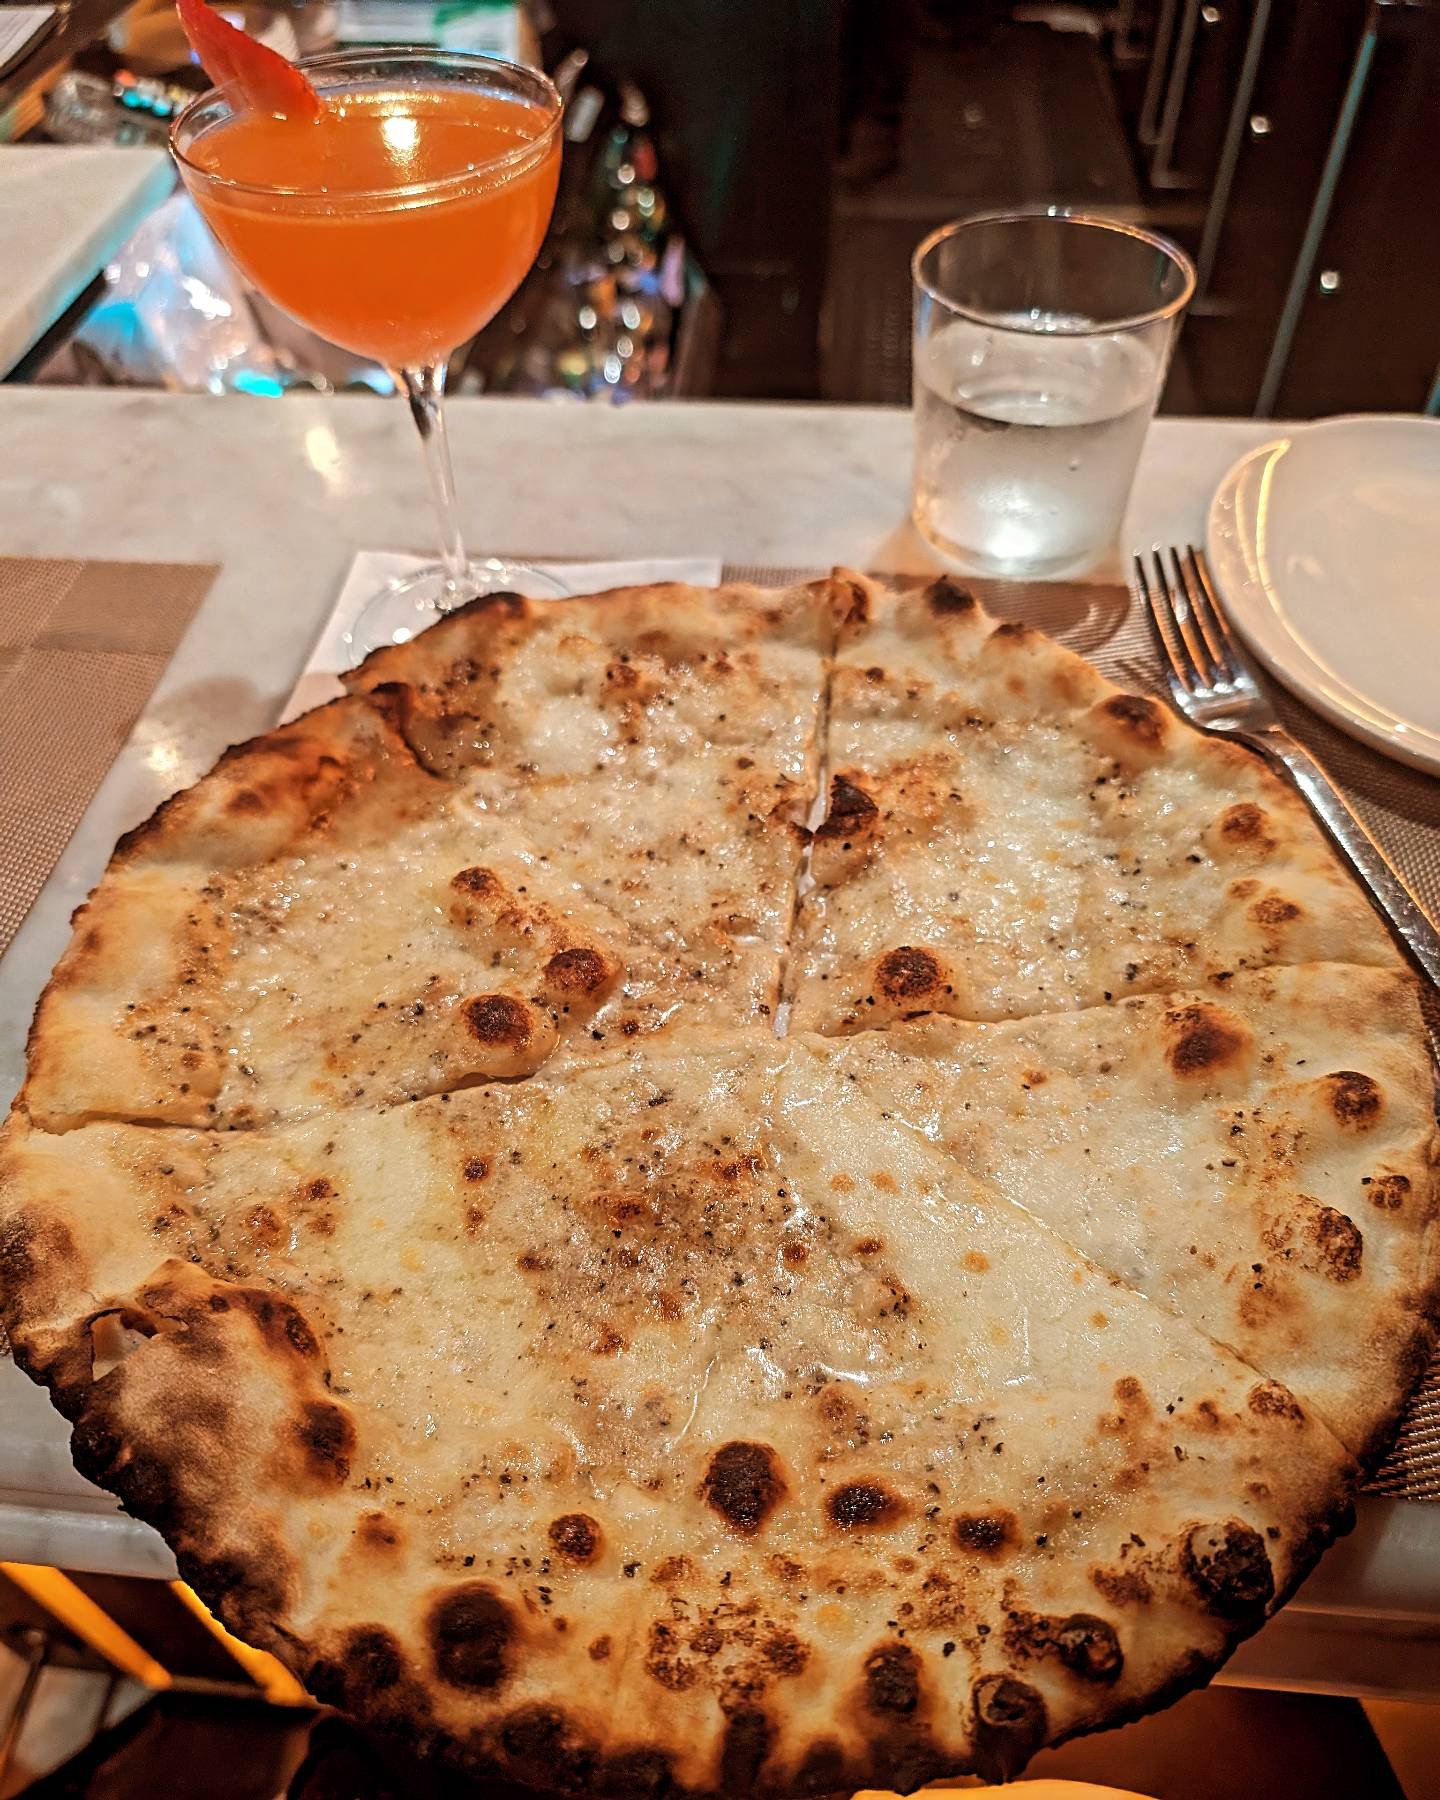 I've been on a #cacioepepe kick and finally had the chance to try @serafinanewyork #champagne pizza paired with this #strawberry #basil #martini perfect after a busy day! I've been a fan of this restaurant forever from my first bite in 2008 ay 55th, 